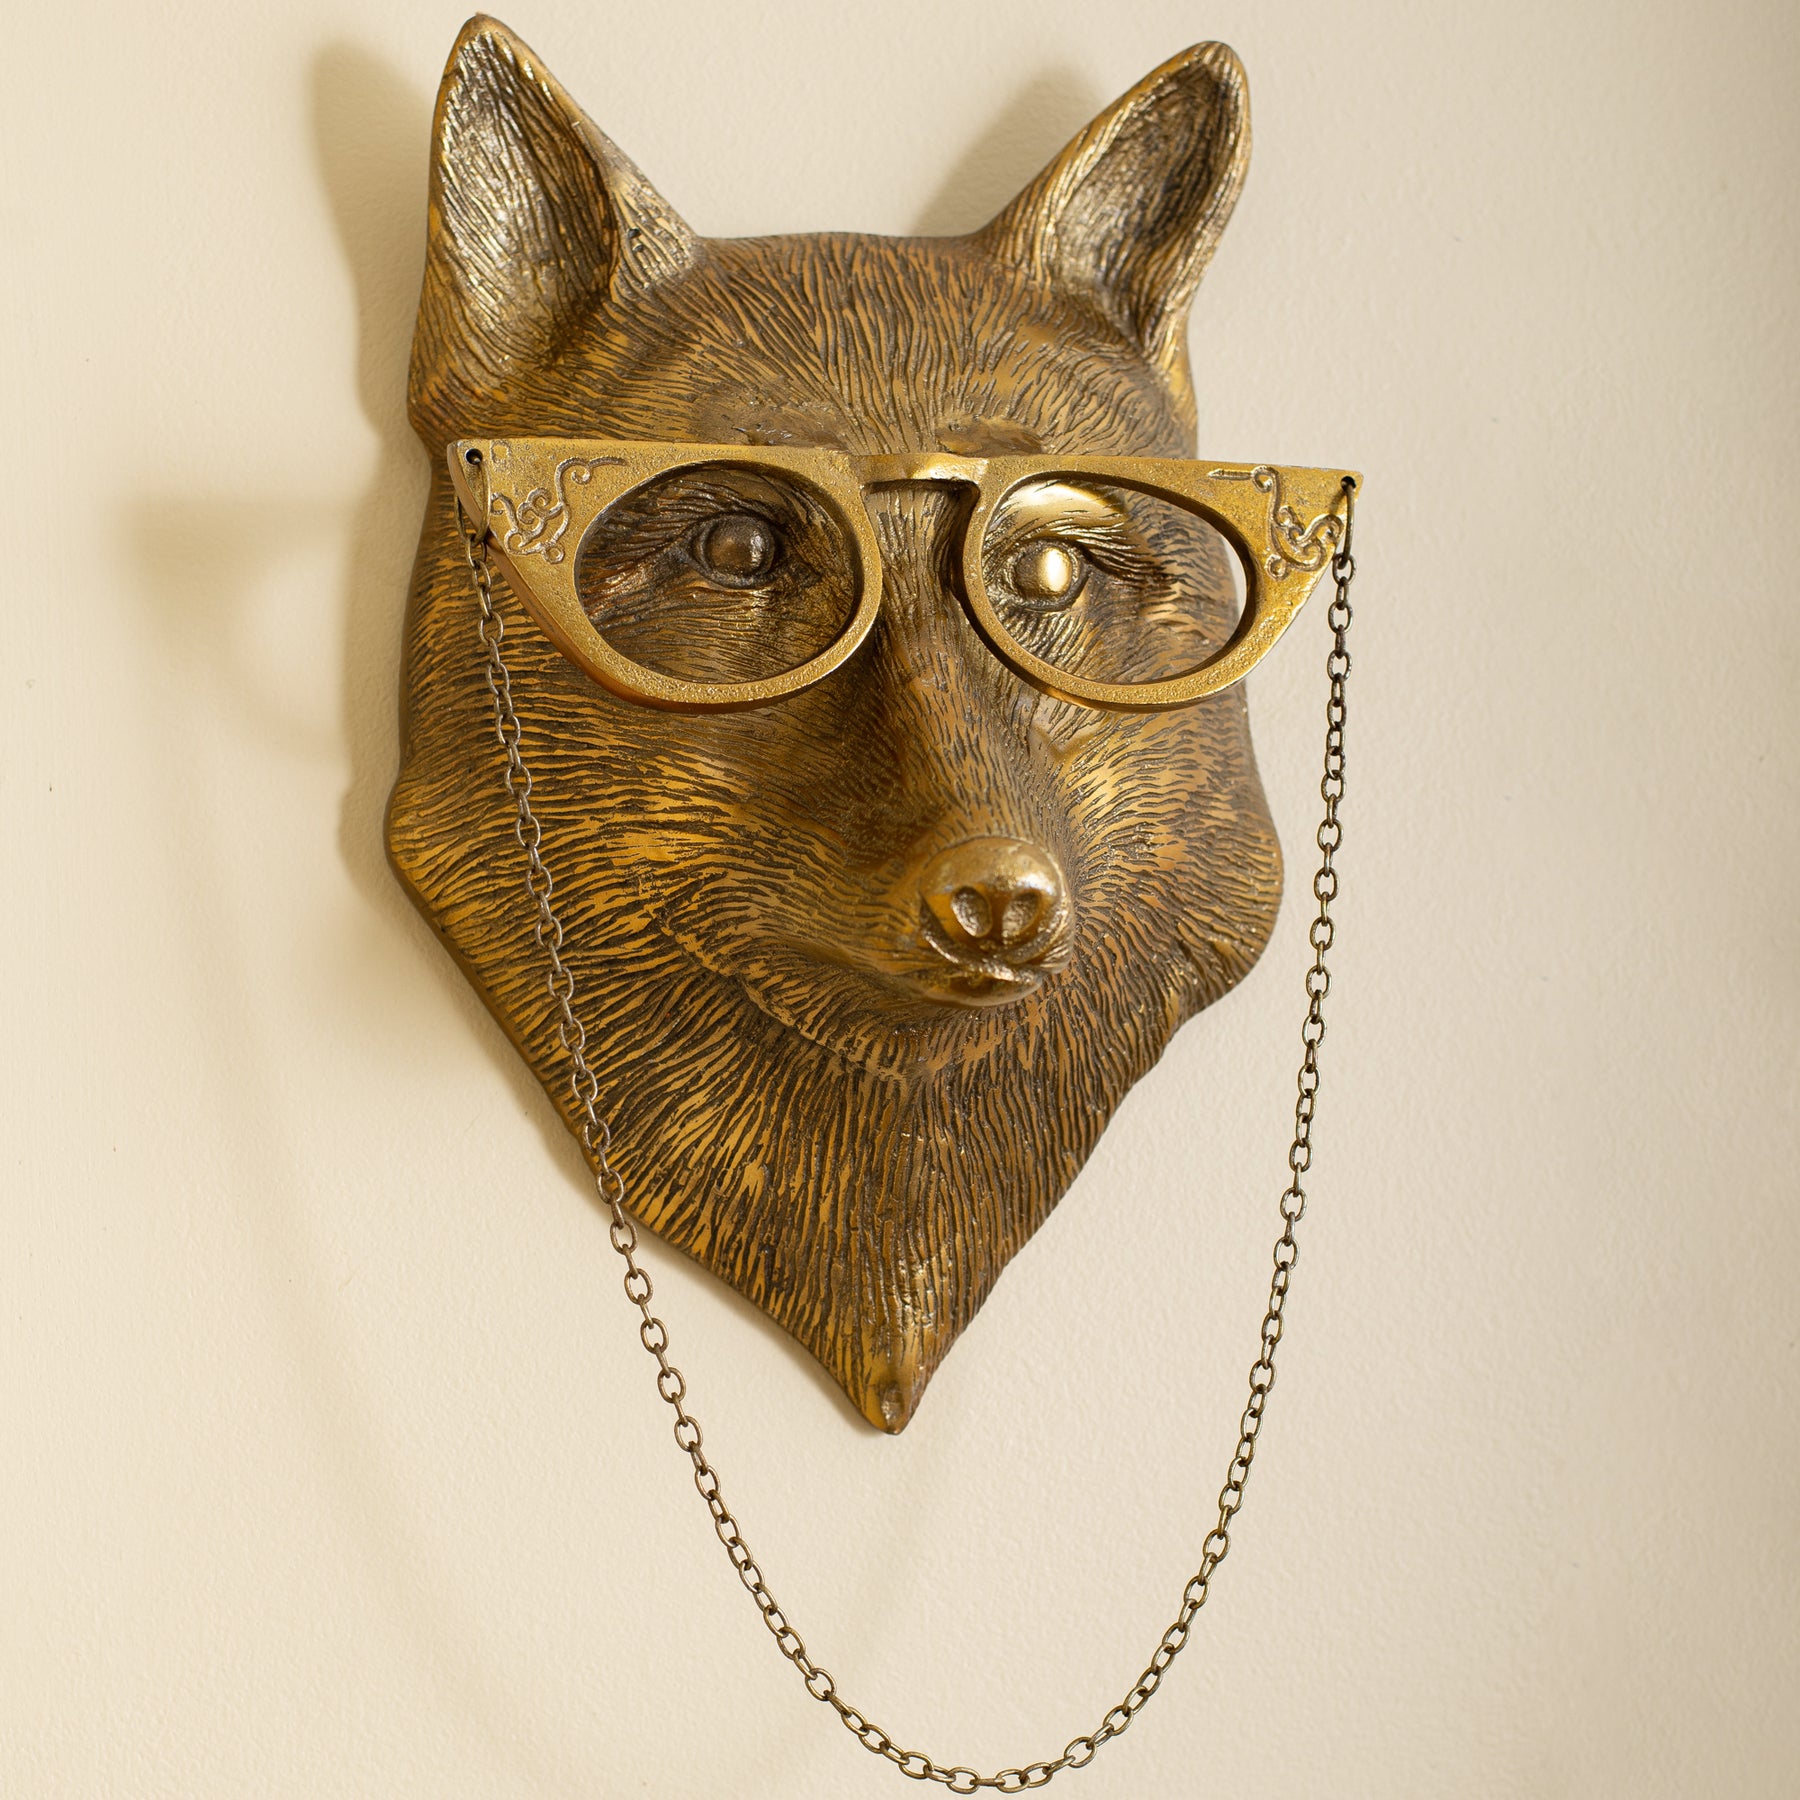 Eric + Eloise Collection Darby – Al Bronzed Eloise - Fox Trading Glasses the with Creek Lady